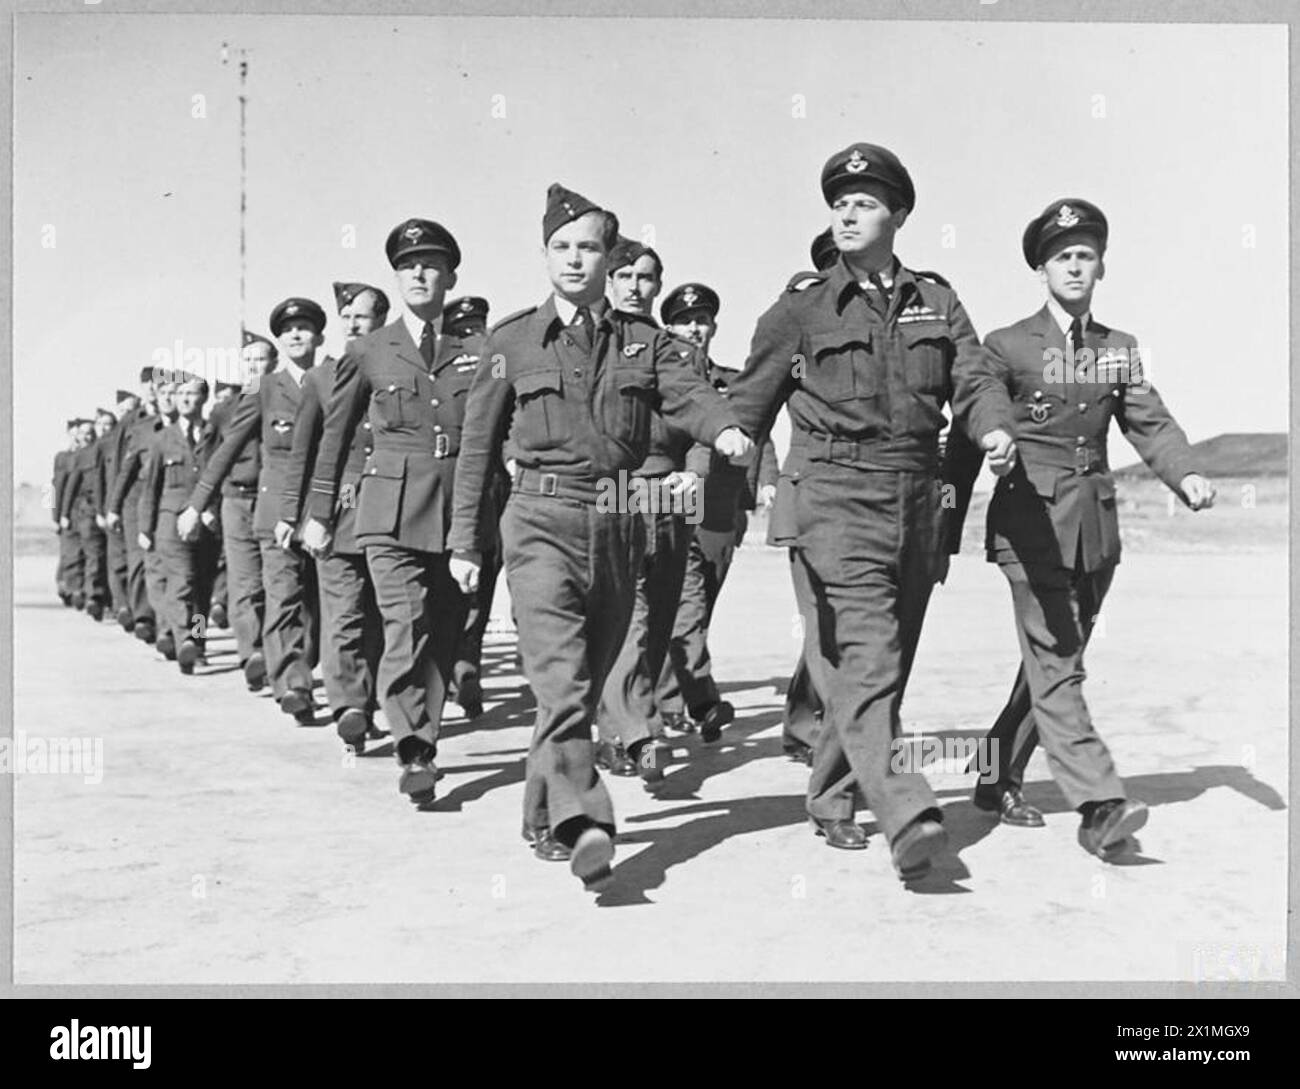 FAREWELL PARADE OF CZECH SQUADRONS - 15867 Picture issued 1945 shows - Czechoslovak air crew and ground personnel, photographed at their farewell parade at Manstone airfield, Kent, returning to their own country, Royal Air Force Stock Photo